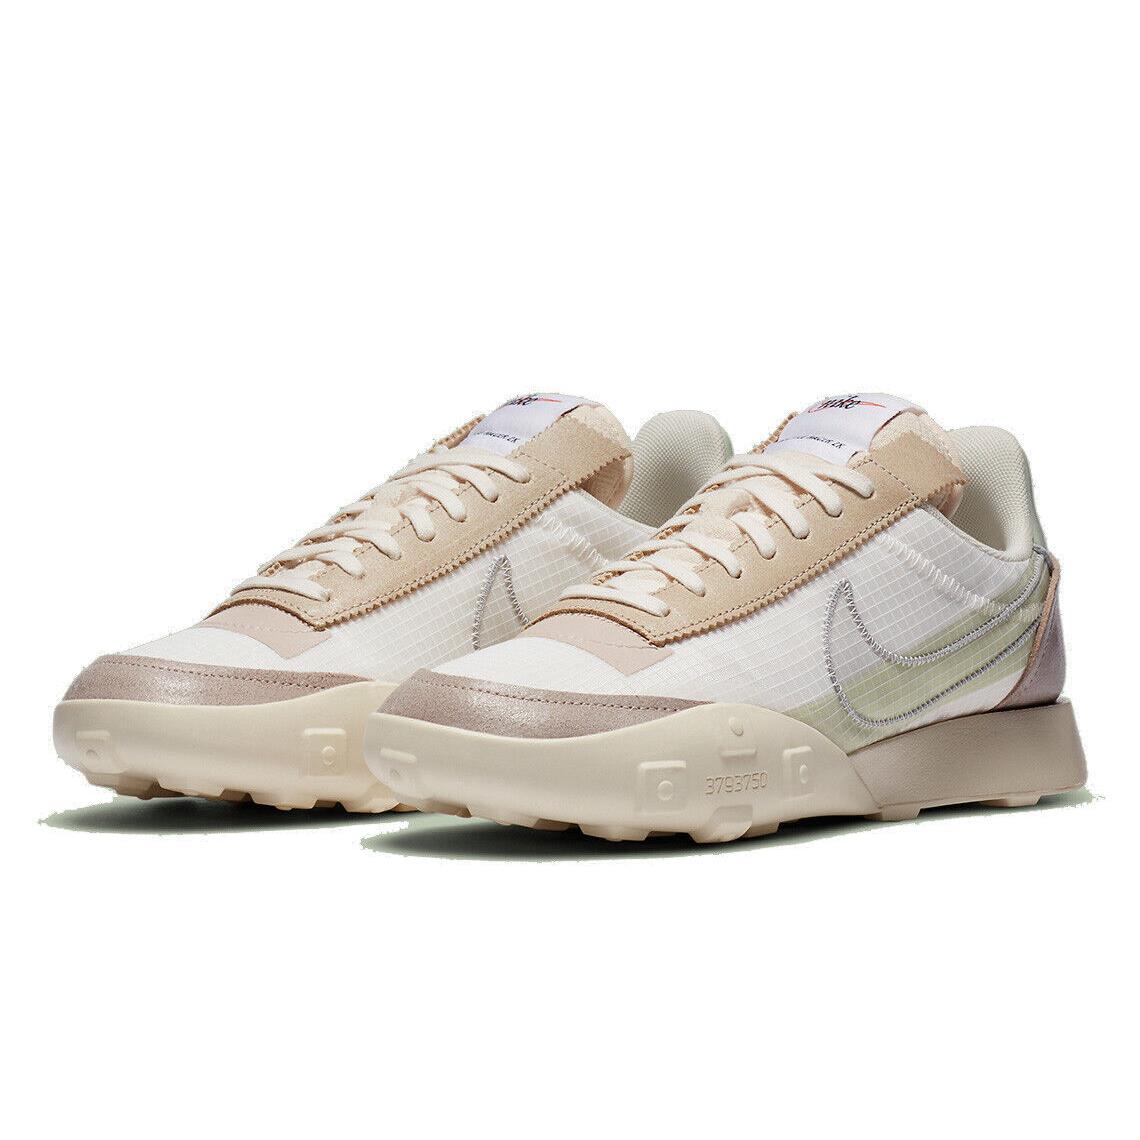 Nike Waffle Racer LX Series QS Womens Size 11.5 Shoes CW1274 100 Ivory